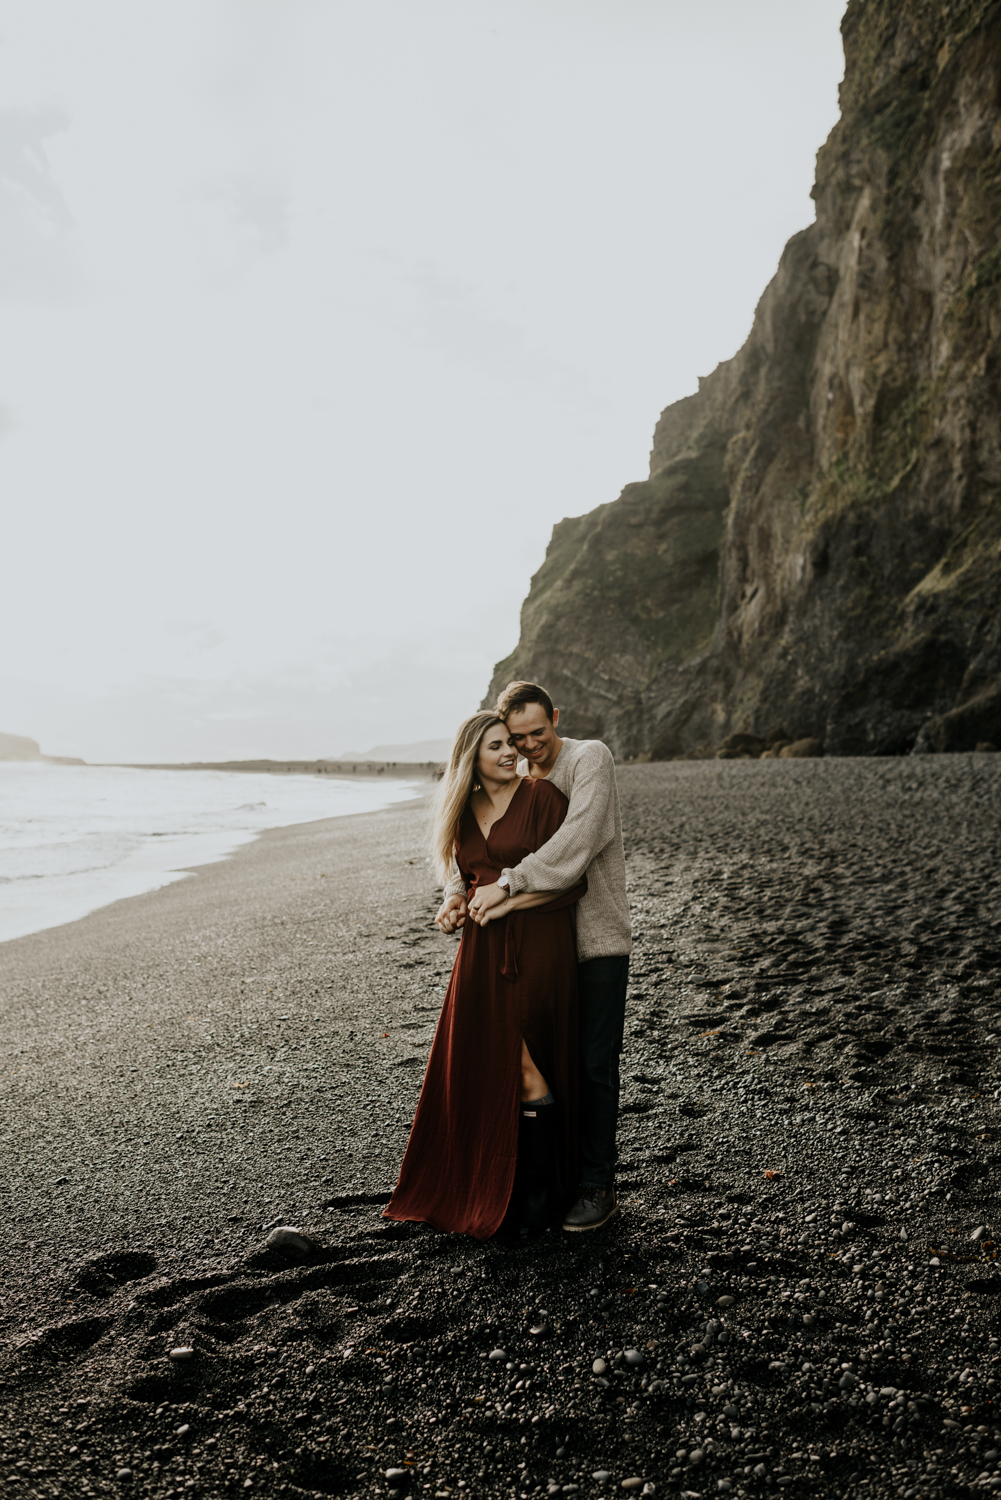 Black Sand beach Adventurous and Romantic Couples Session in Vik, Iceland